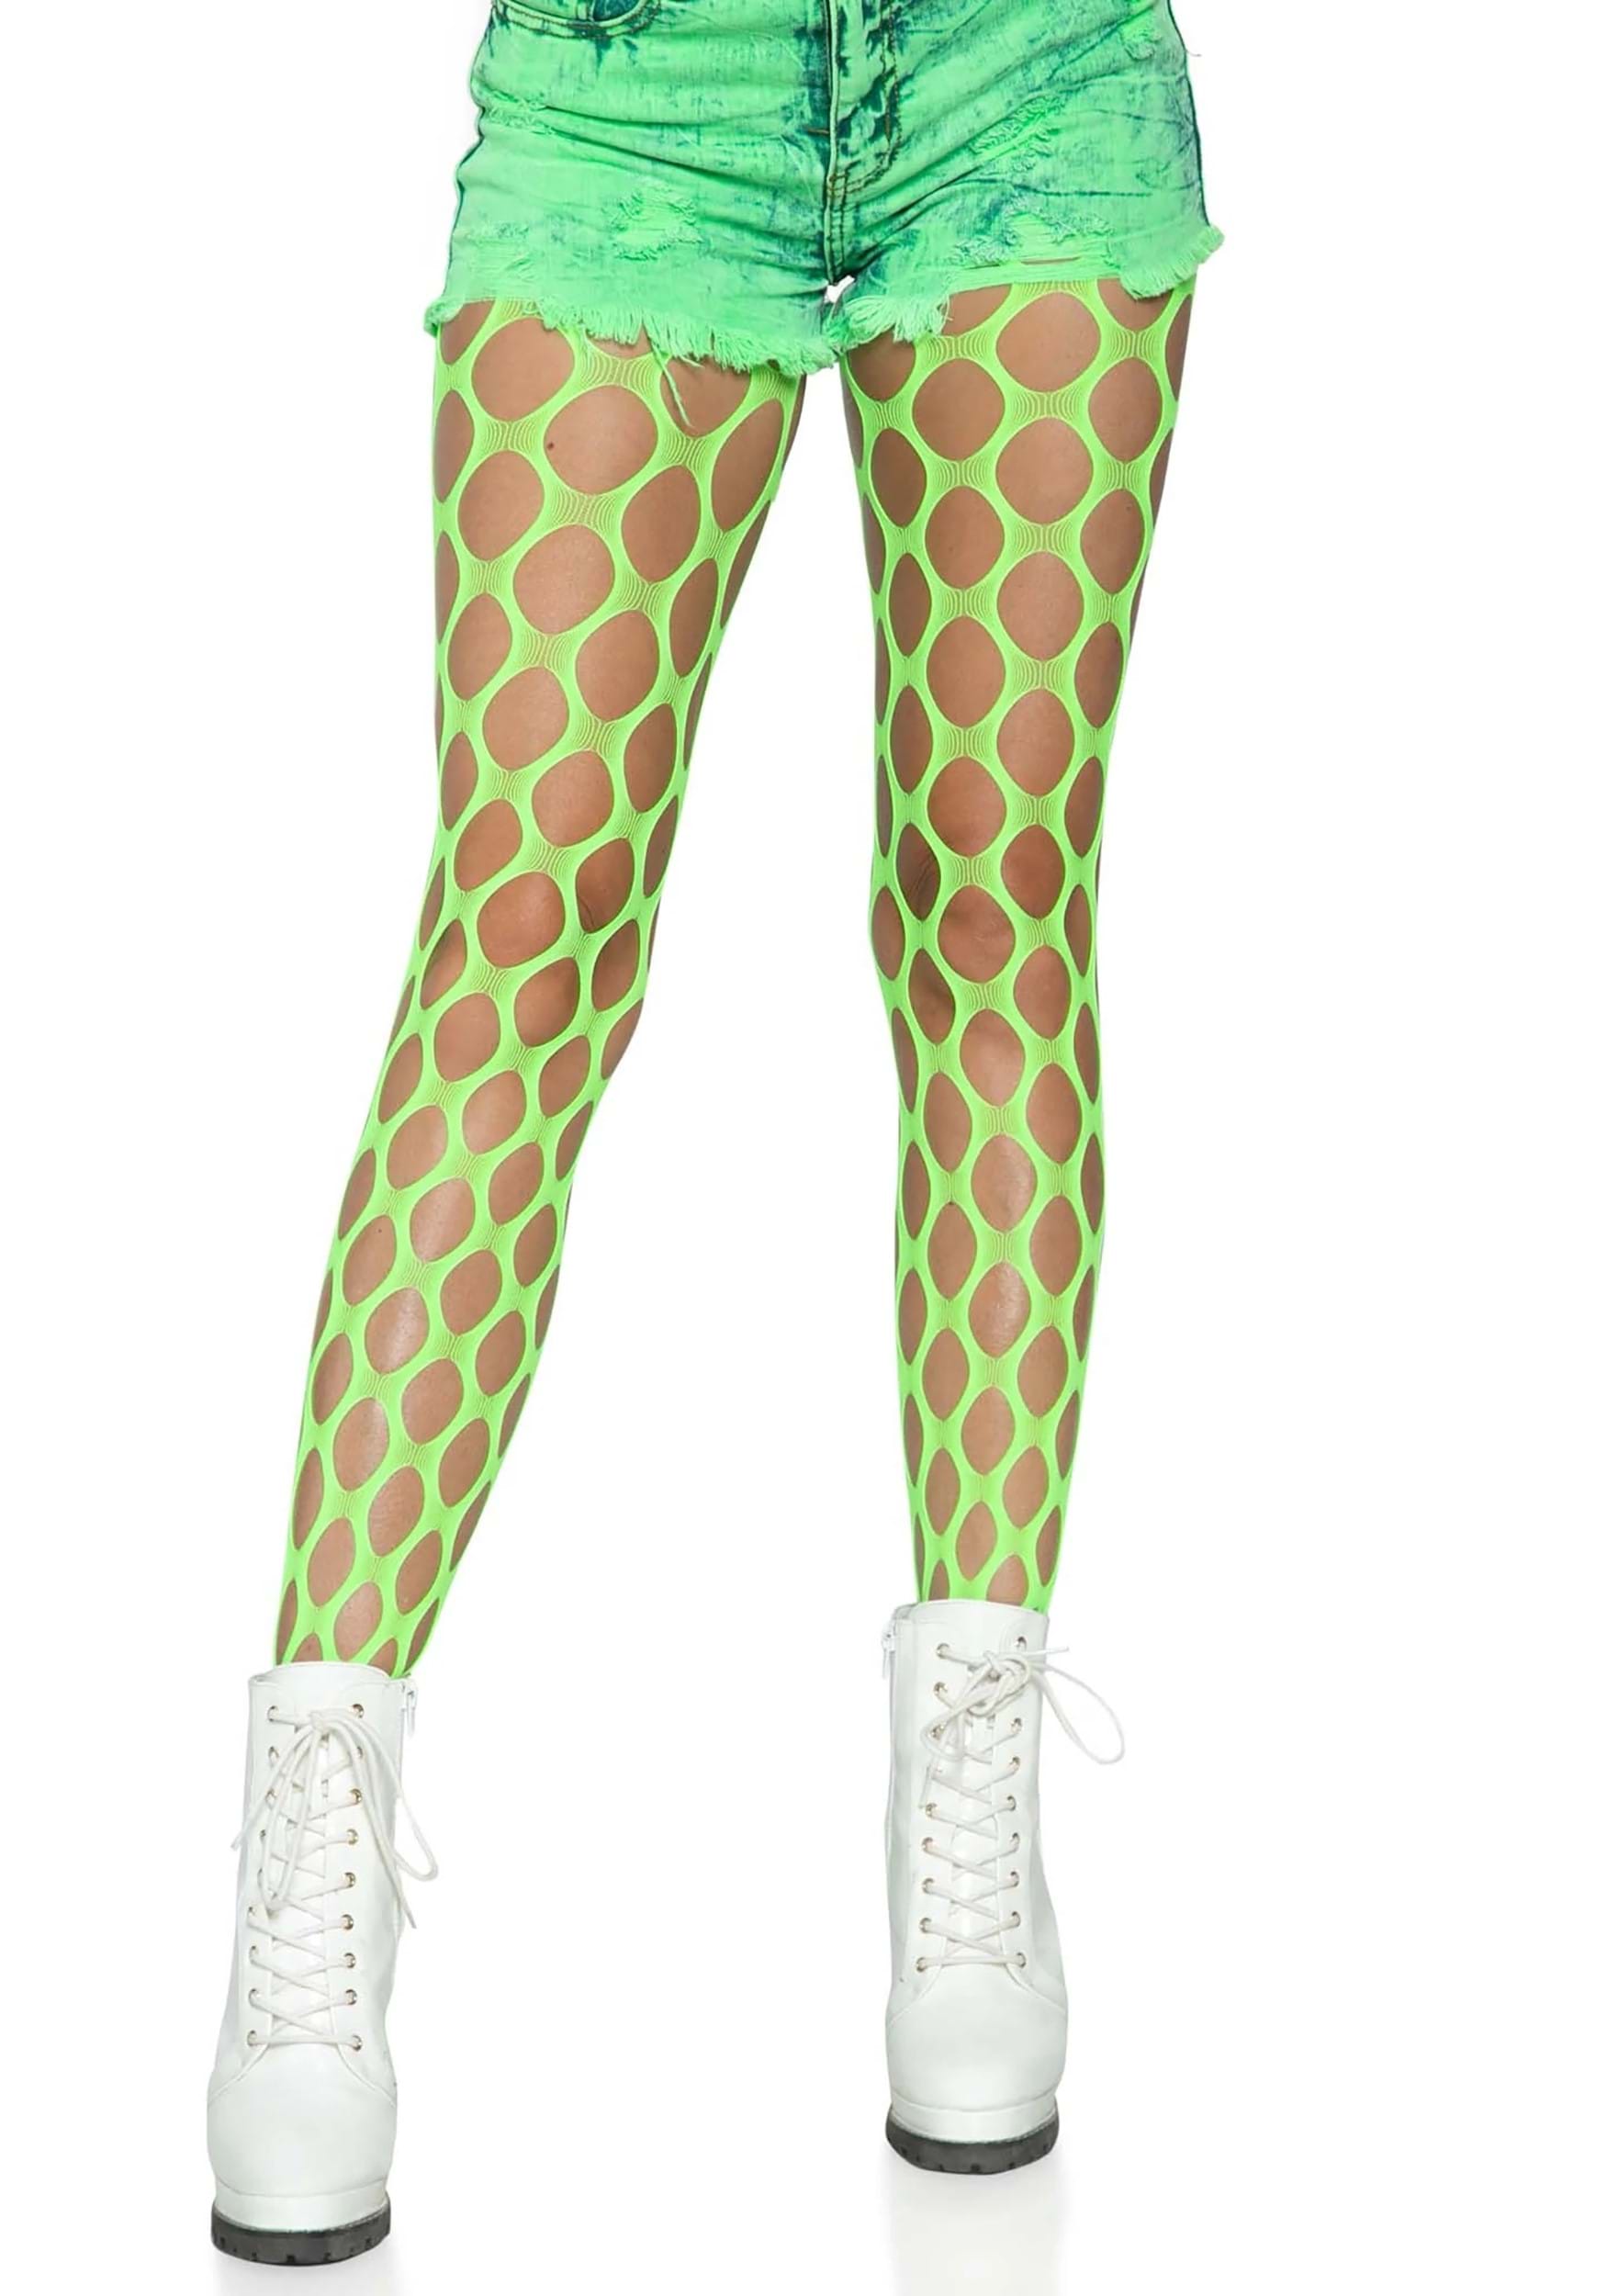 Opaque Neon Green Footless Stockings